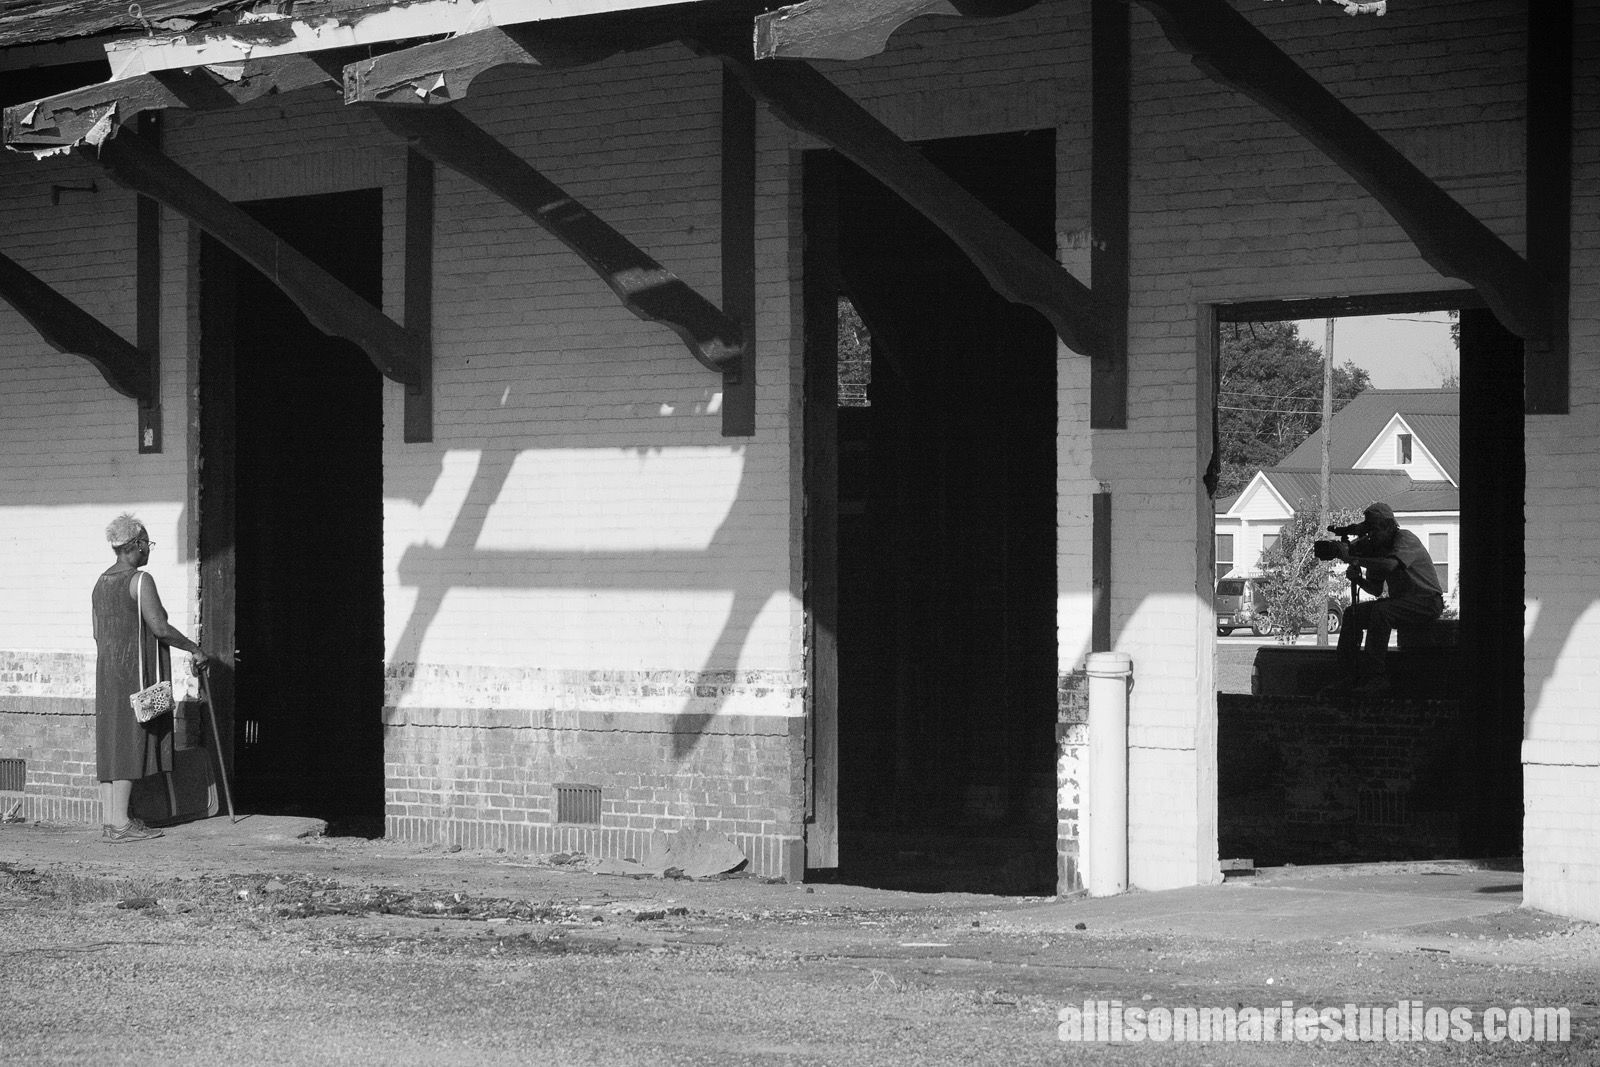 Shooting at the old Depot in Jesup, GA.